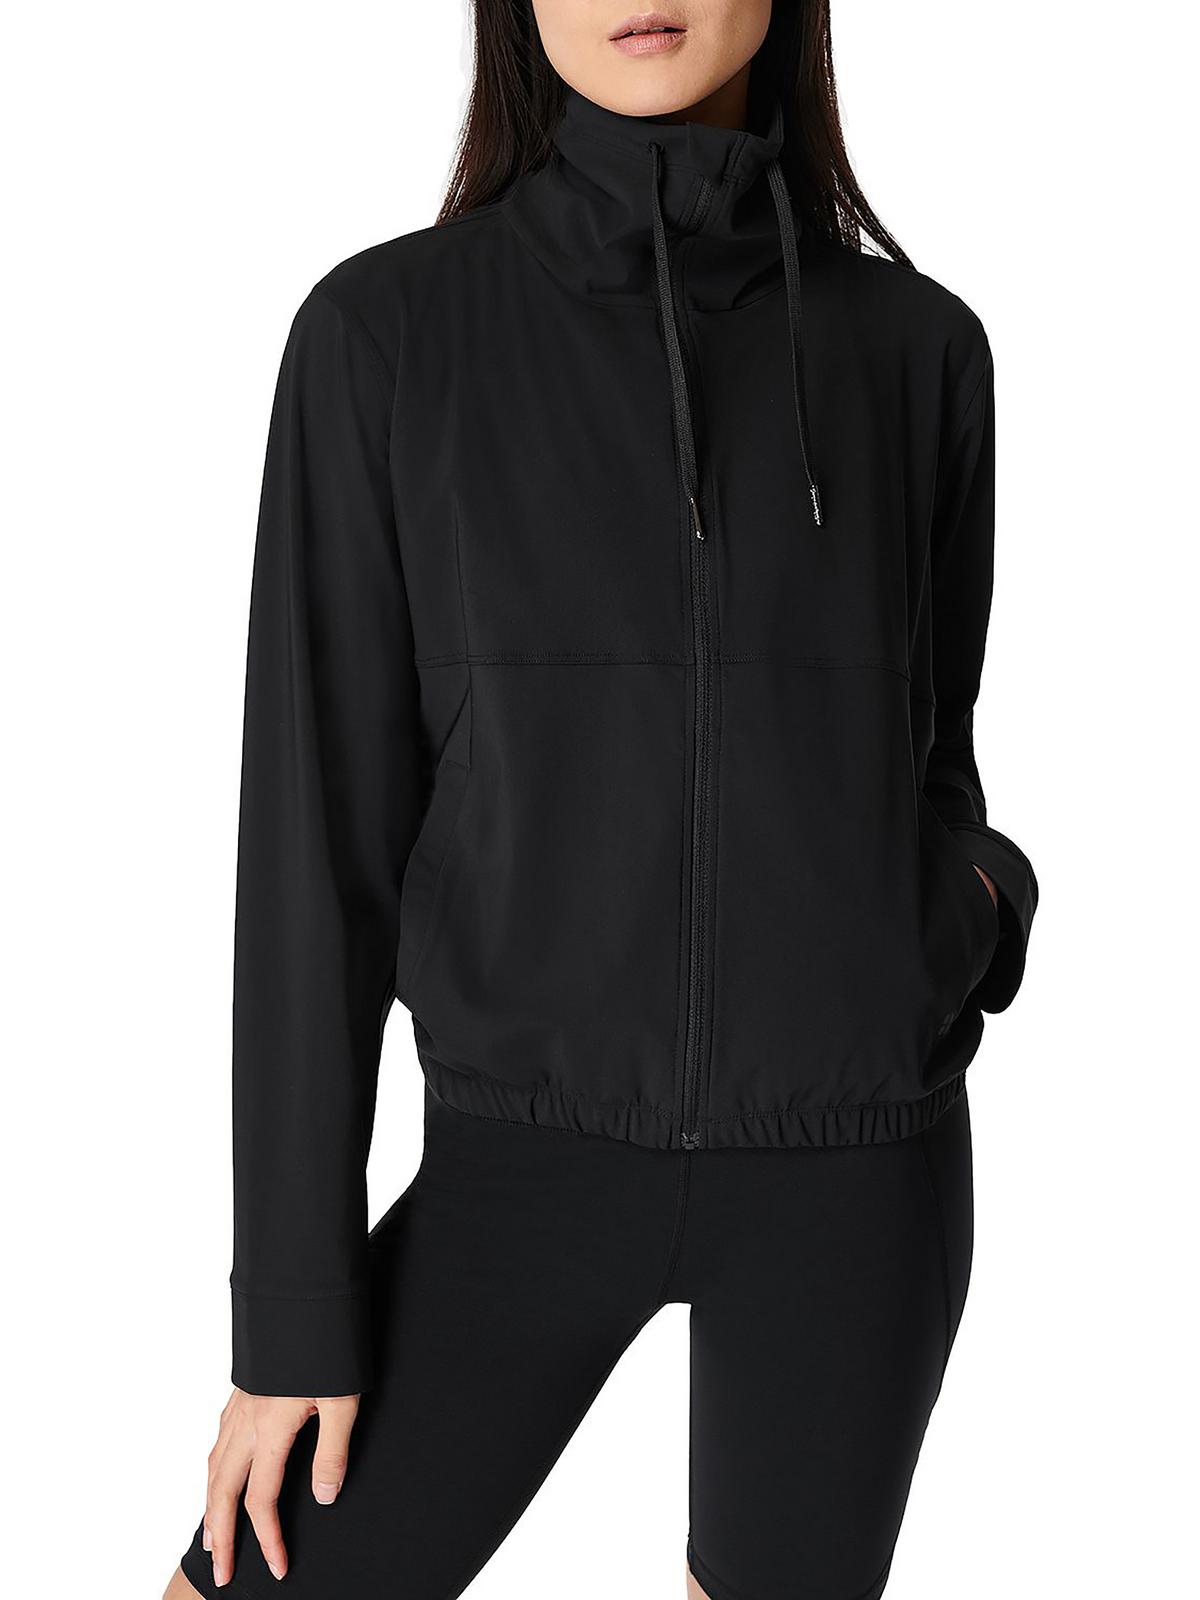 SWEATY BETTY Explorer Womens Recycled Polyester Front Zip Zip-Up Jacket